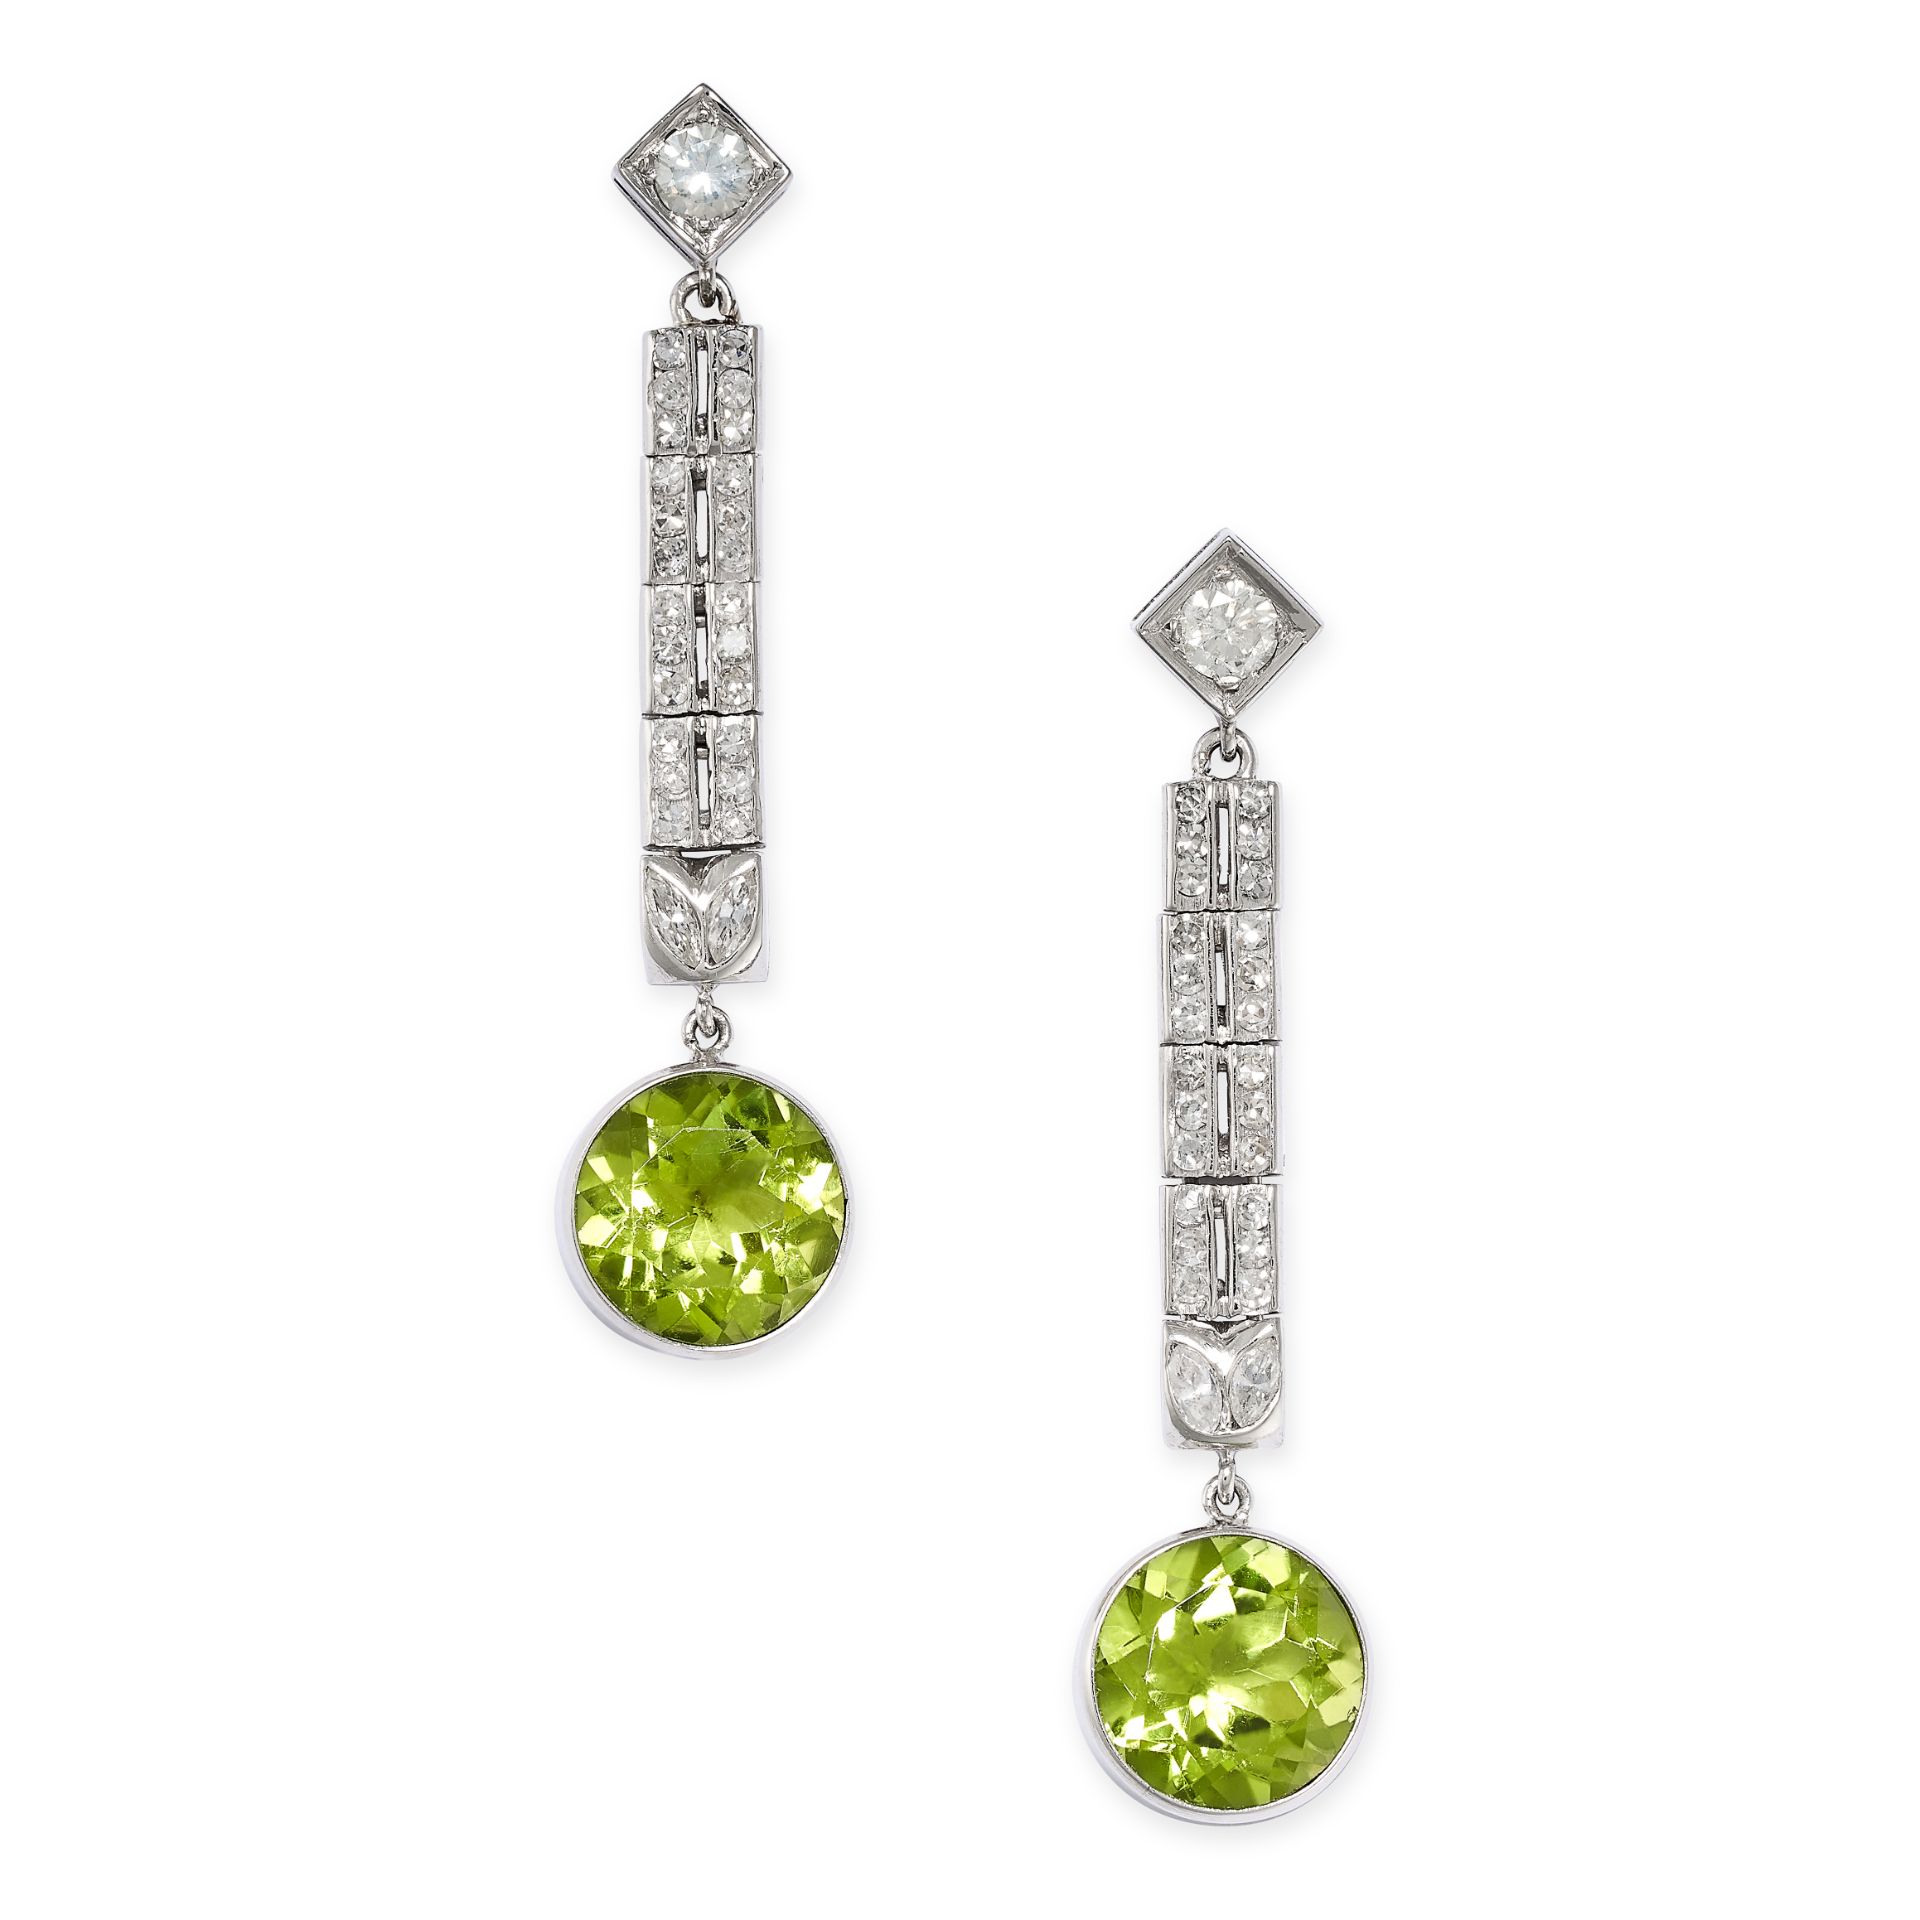 A PAIR OF PERIDOT AND DIAMOND DROP EARRINGS in platinum, each set with a row of round cut